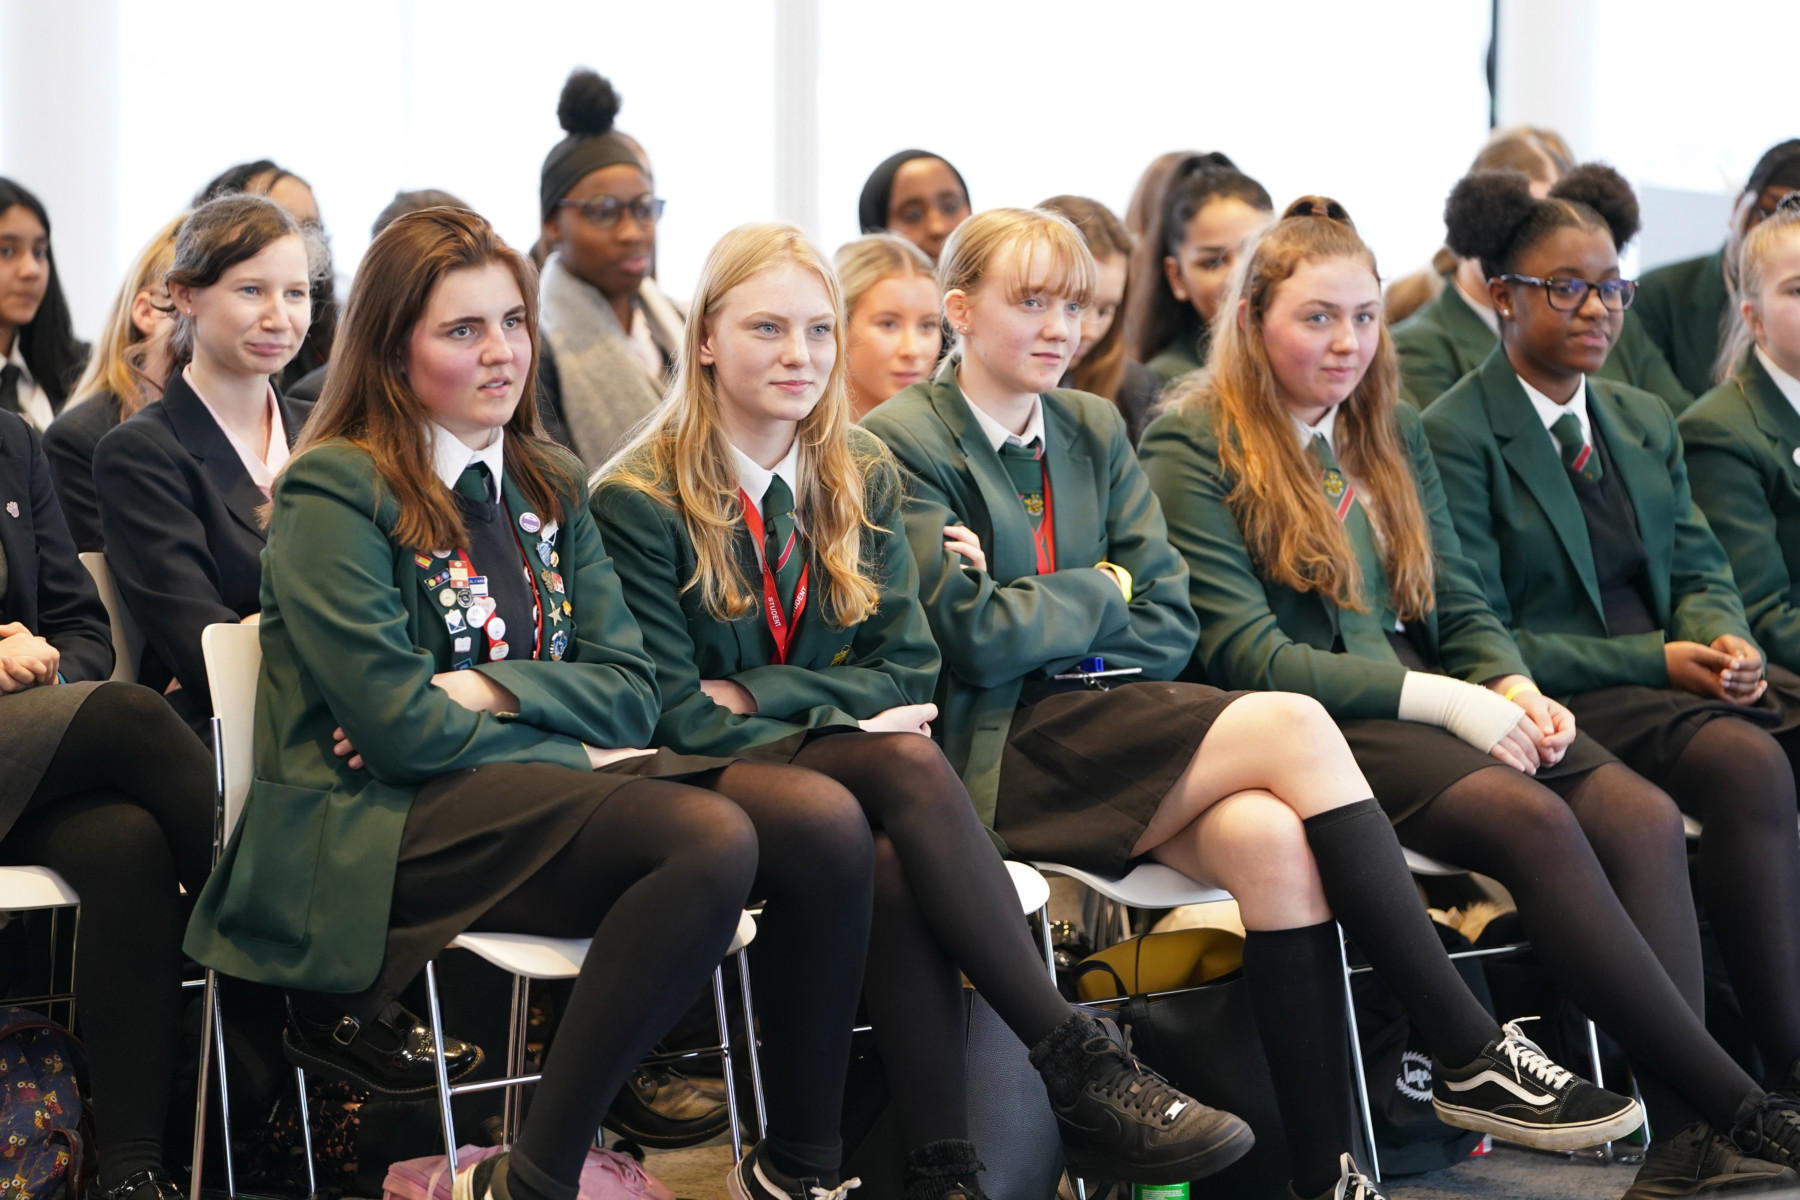 Davina was described as inspirational by pupils and teachers at News UK’s London HQ last week